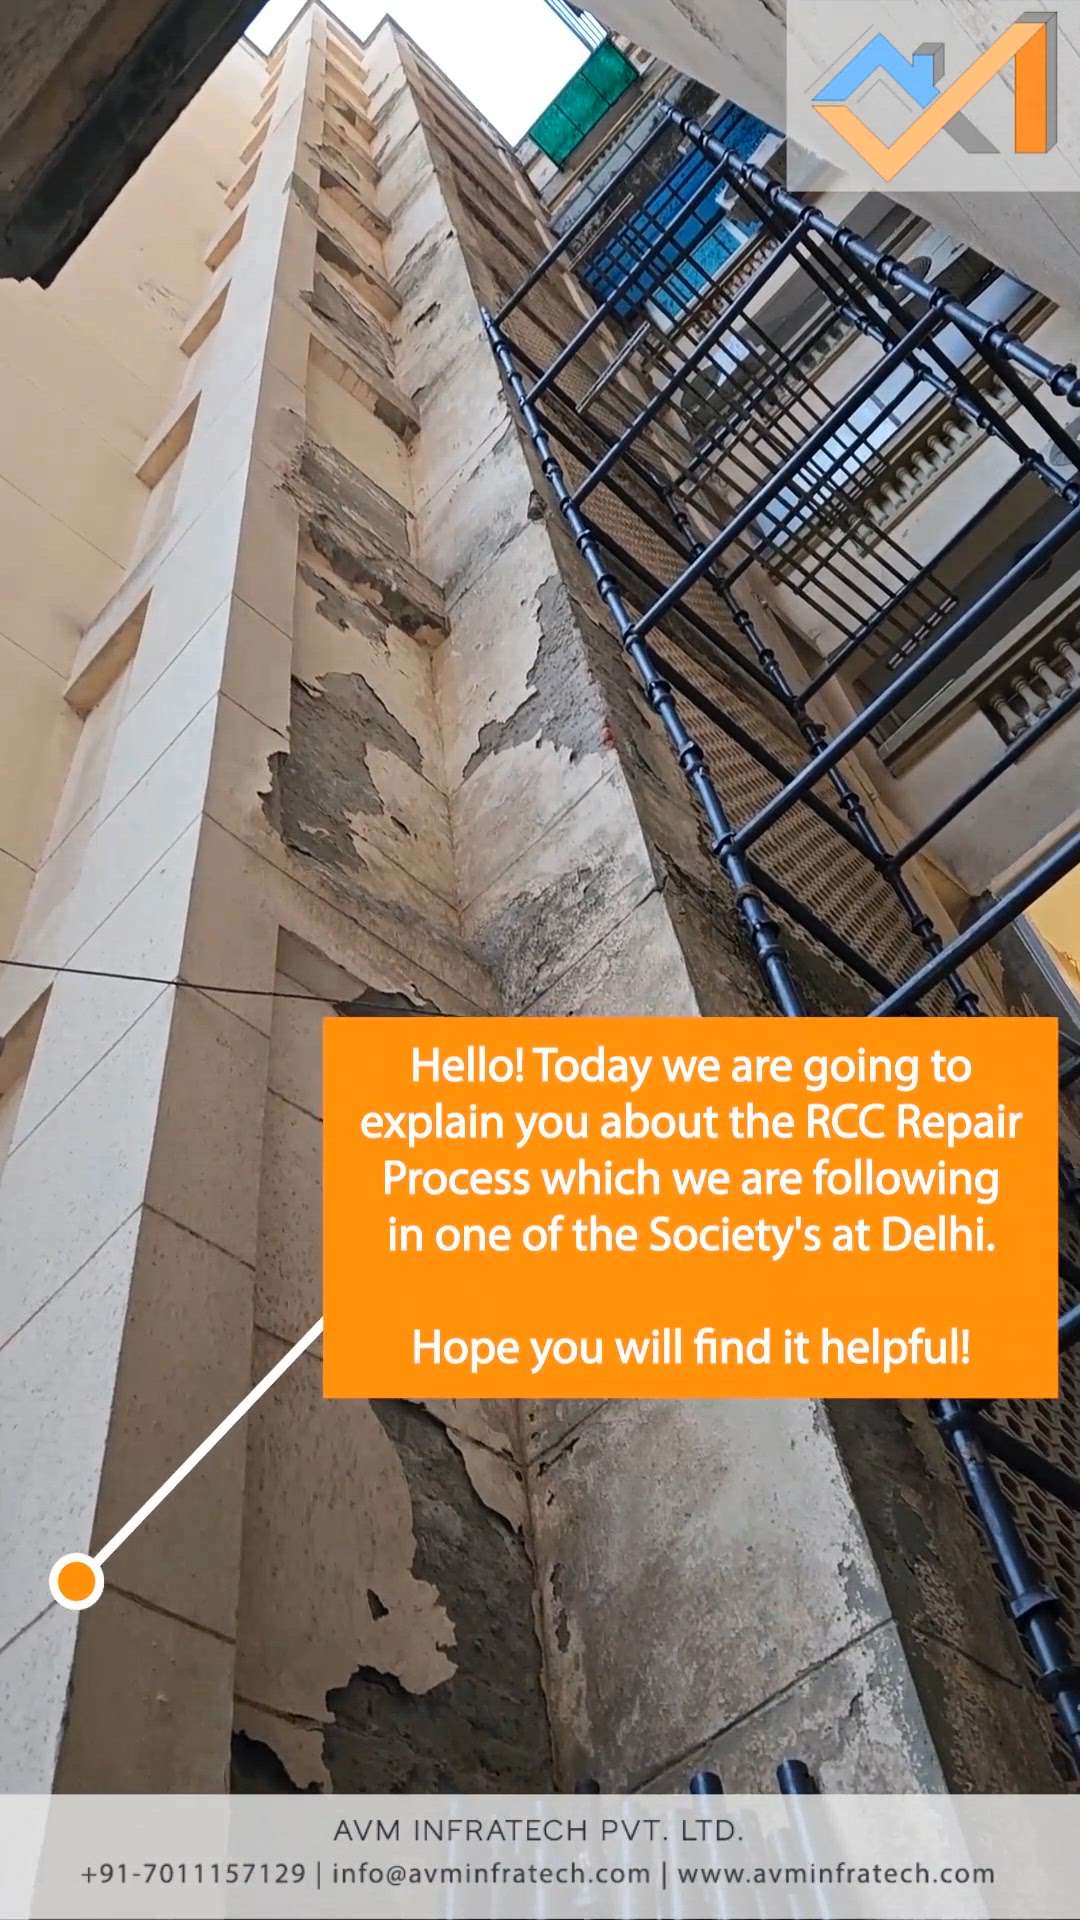 Let's check out the damaged RCC Repair process we are following in one of the society at Delhi.


Follow us for more such amazing updates.
.
.
#rcc #rccrepairwork #repair #damage #damaged #column #columns #beam #beams #columnrepair #beamrepair #avminfratech #society #facade #retro #restrofit #rehabilitation #process #educational #rust #rustremoval #primer #bonding #bondingagent #sika #fosroc